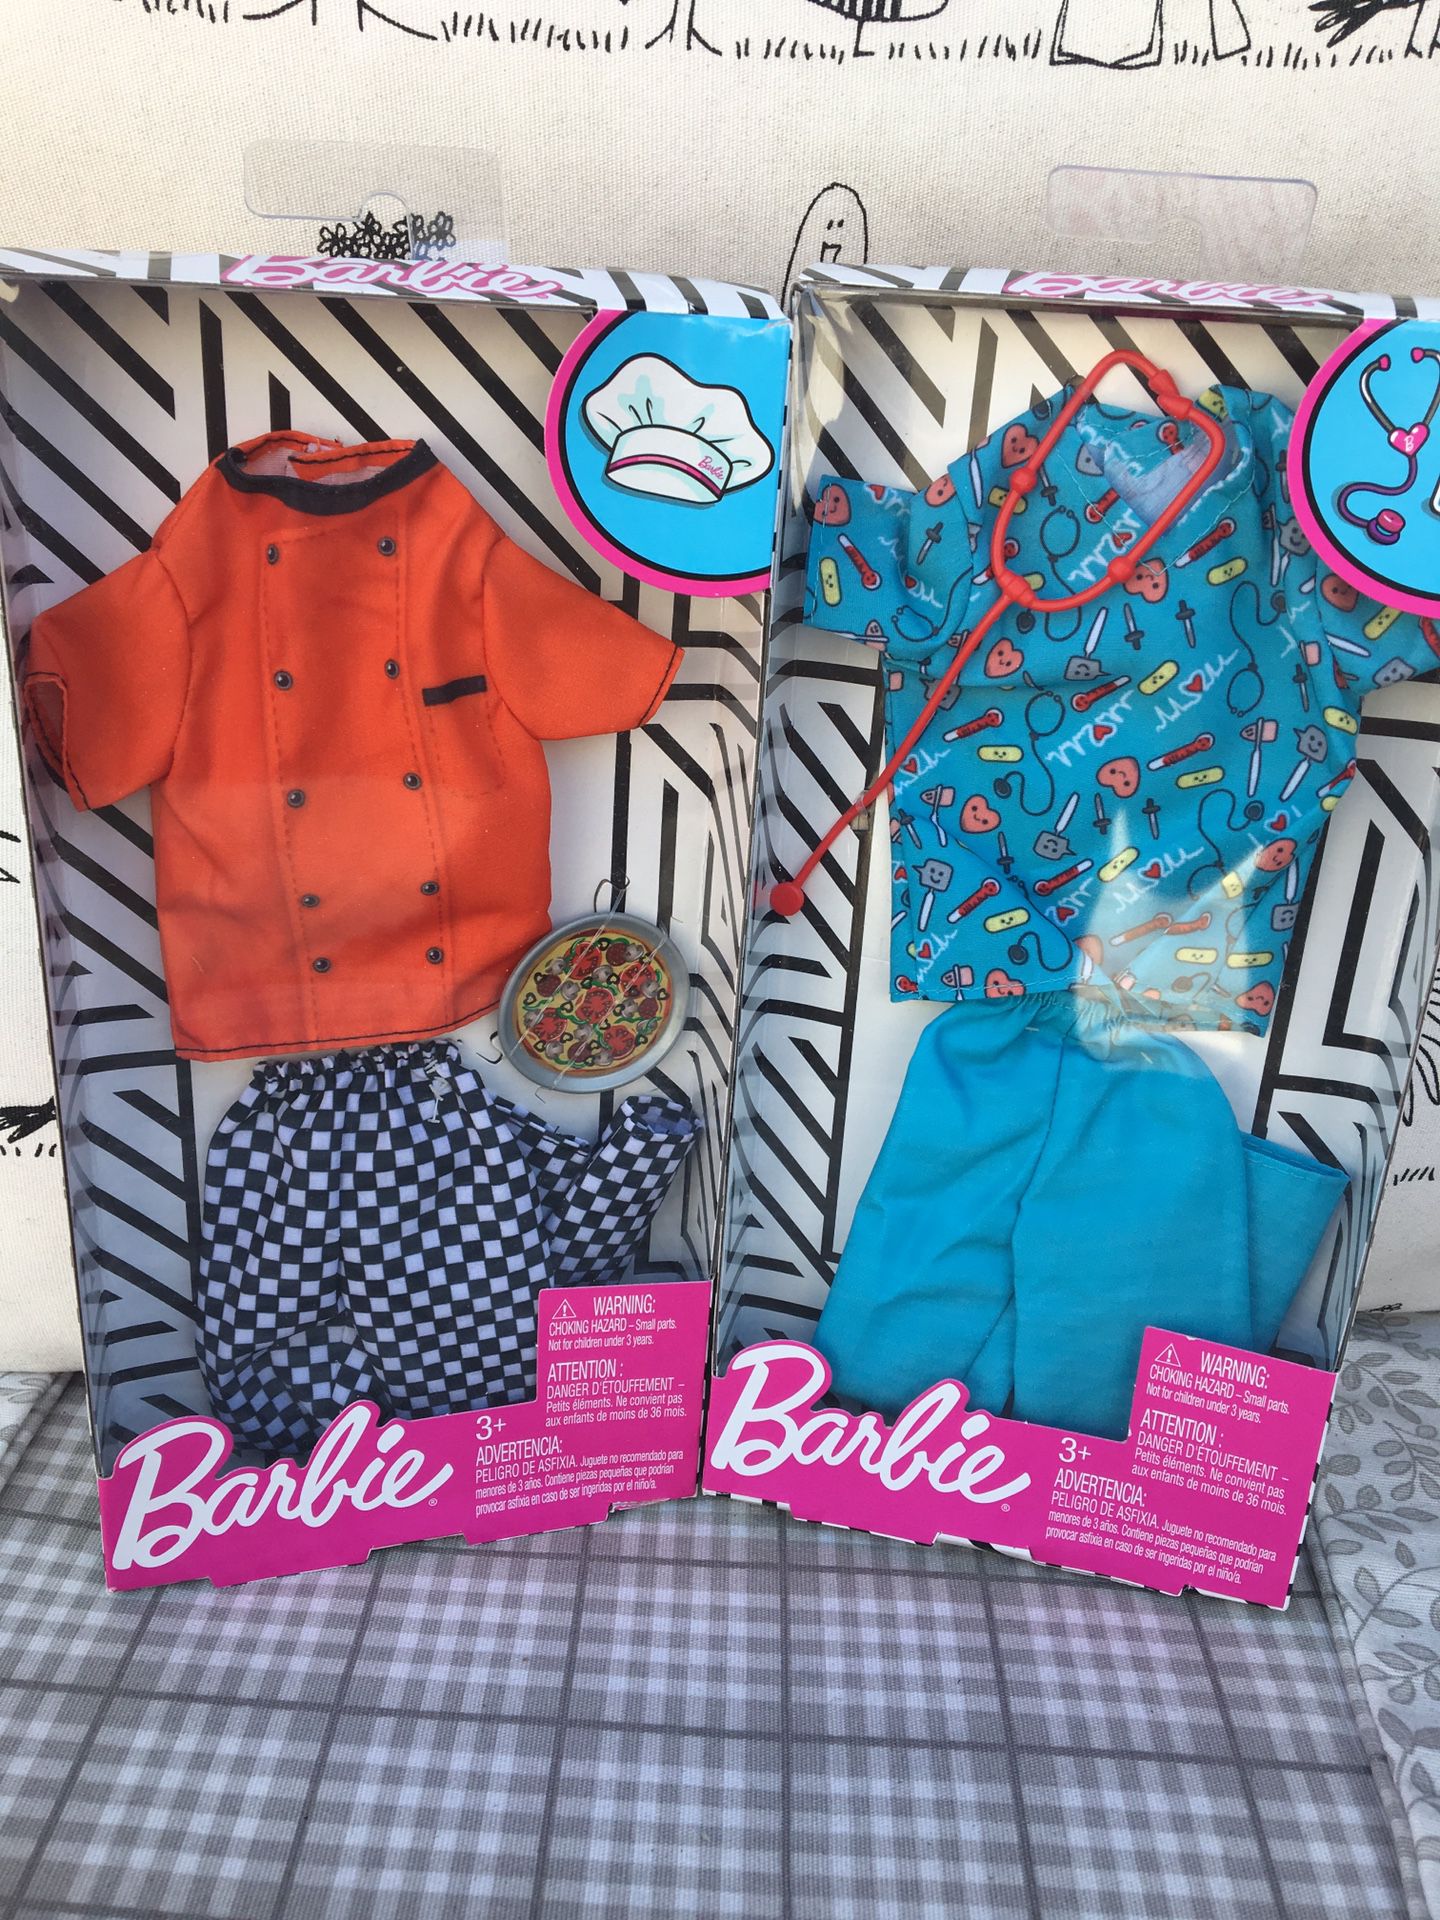 Barbie- Ken Doll Doctor/Nurse, Pizza Chef Fashion 2 Outfits Clothes New In Box!